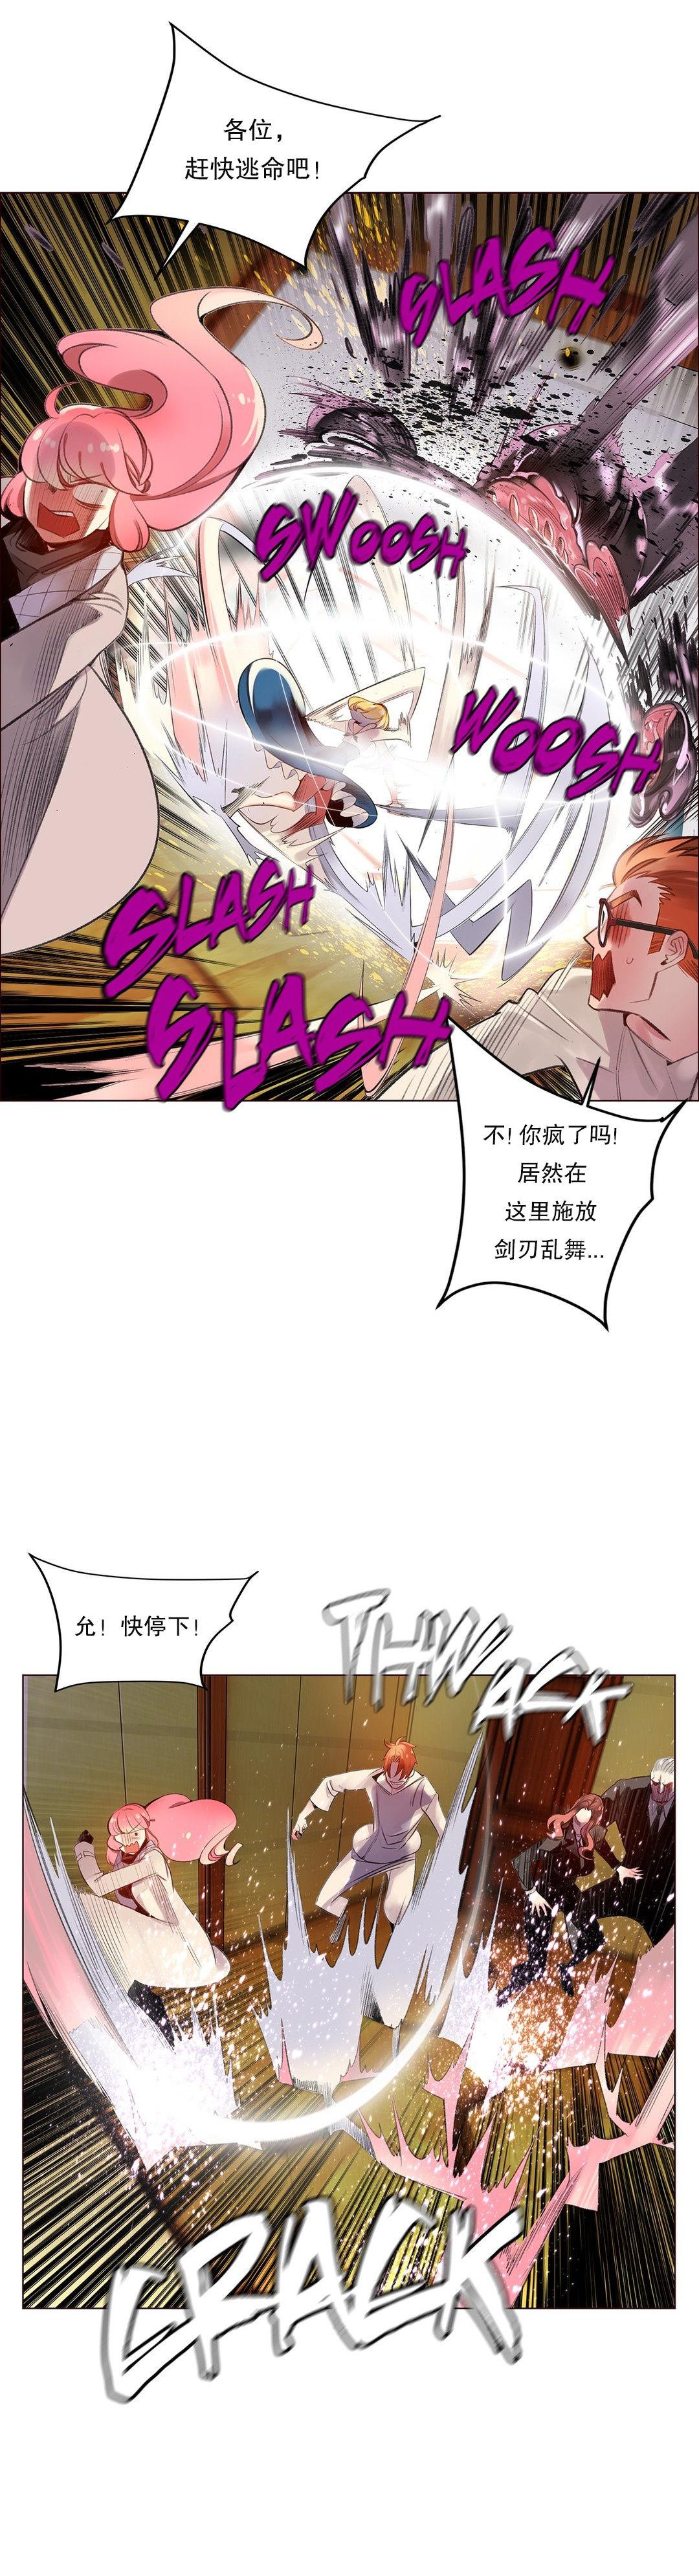 [Juder] Lilith`s Cord (第二季) Ch.61-66 [Chinese] [aaatwist个人汉化] [Ongoing] 160